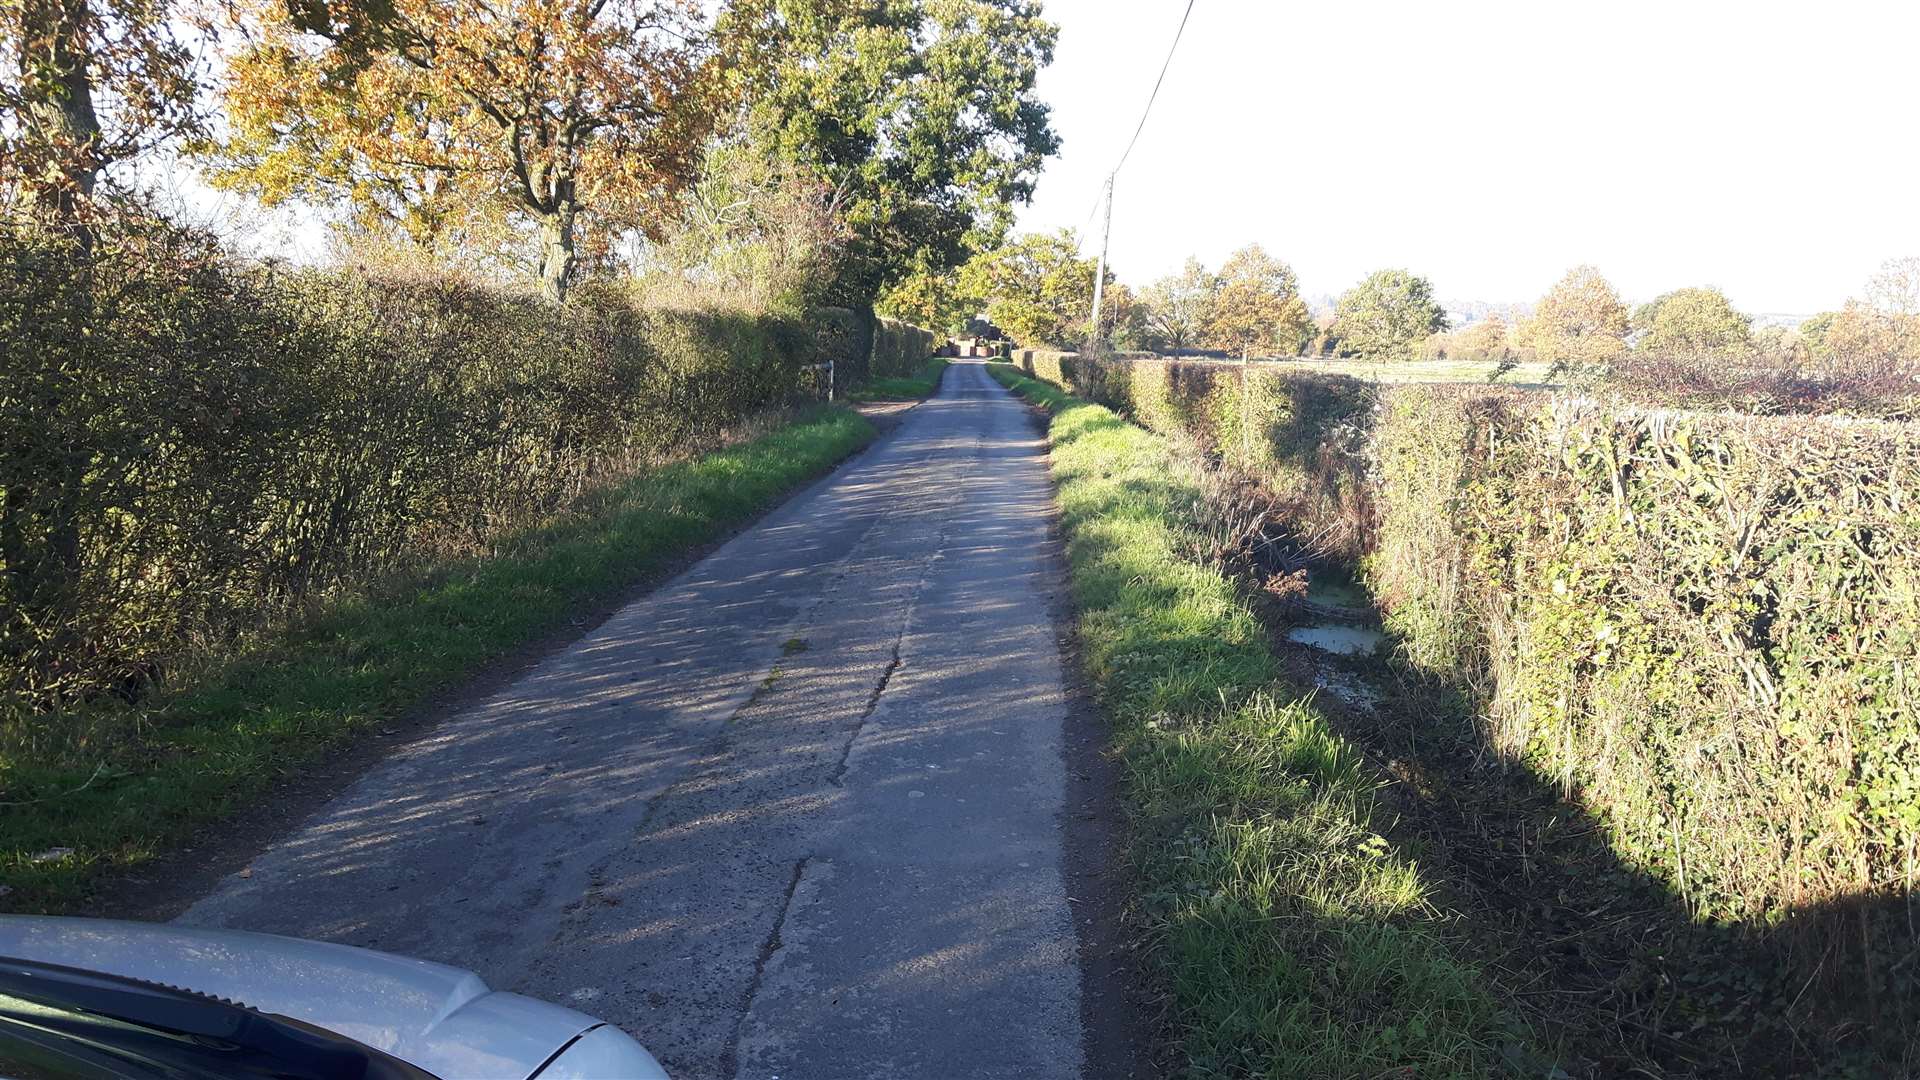 Both sites are approached by a narrow country lane